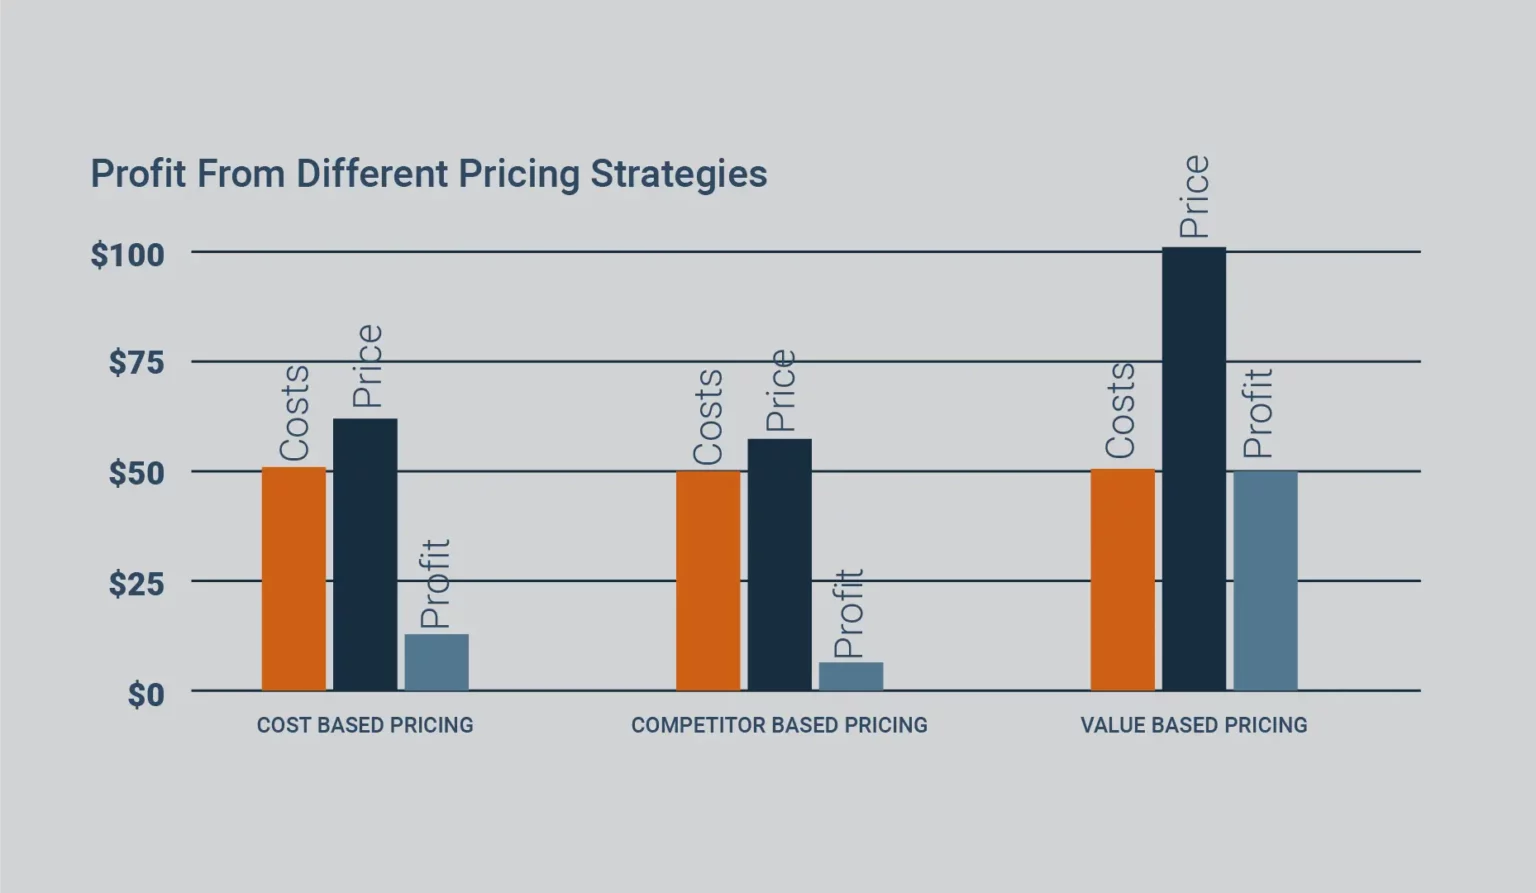 Profits from different pricing strategies